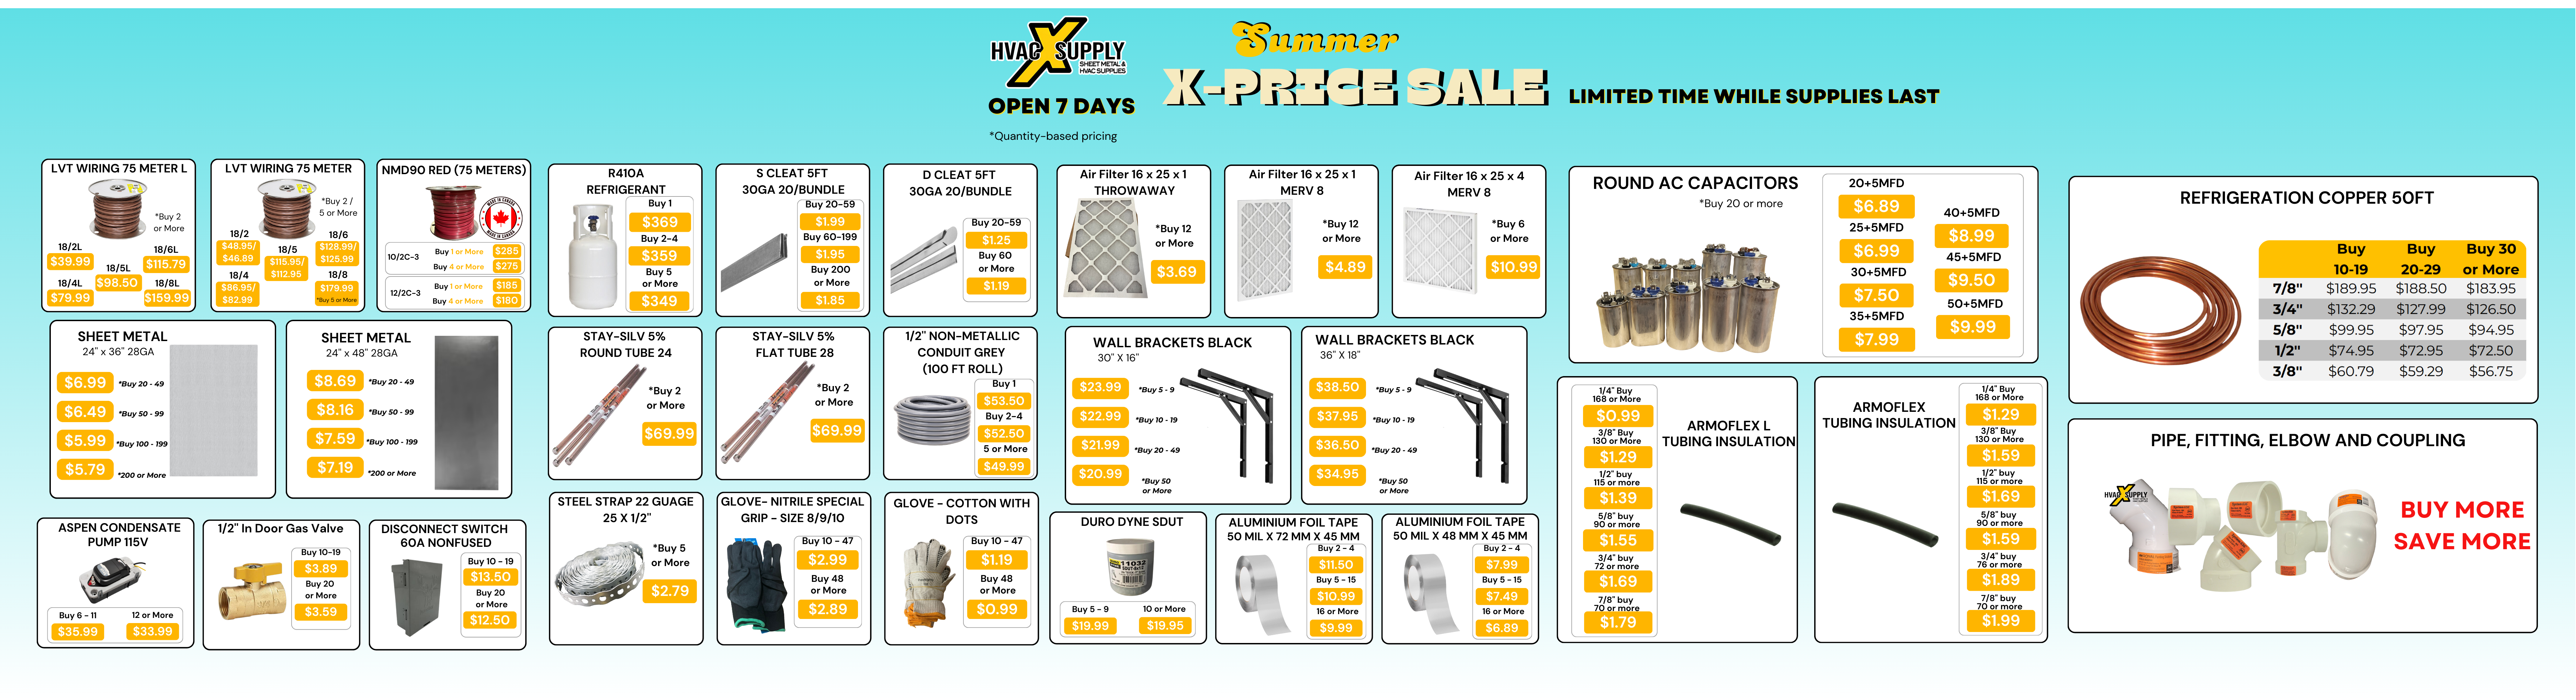 Summer X-Price Sale at HVAC X Supply: Limited Time Only. Special pricing on HVAC products including LVT wiring, NMD90 red wiring, R410A refrigerant, air filters, round AC capacitors, refrigeration copper, sheet metal, S cleat and D cleat, stay-silv flat tube, non-metallic conduit, wall brackets, condensate pump, gas valve, disconnect switch, steel strap, various gloves, foil tape, tubing insulation, and pipe fittings. Visit HVAC X Supply at 278 Watline Ave, or call 416-399-9330. Open 7 days a week. Quantity-based pricing available.